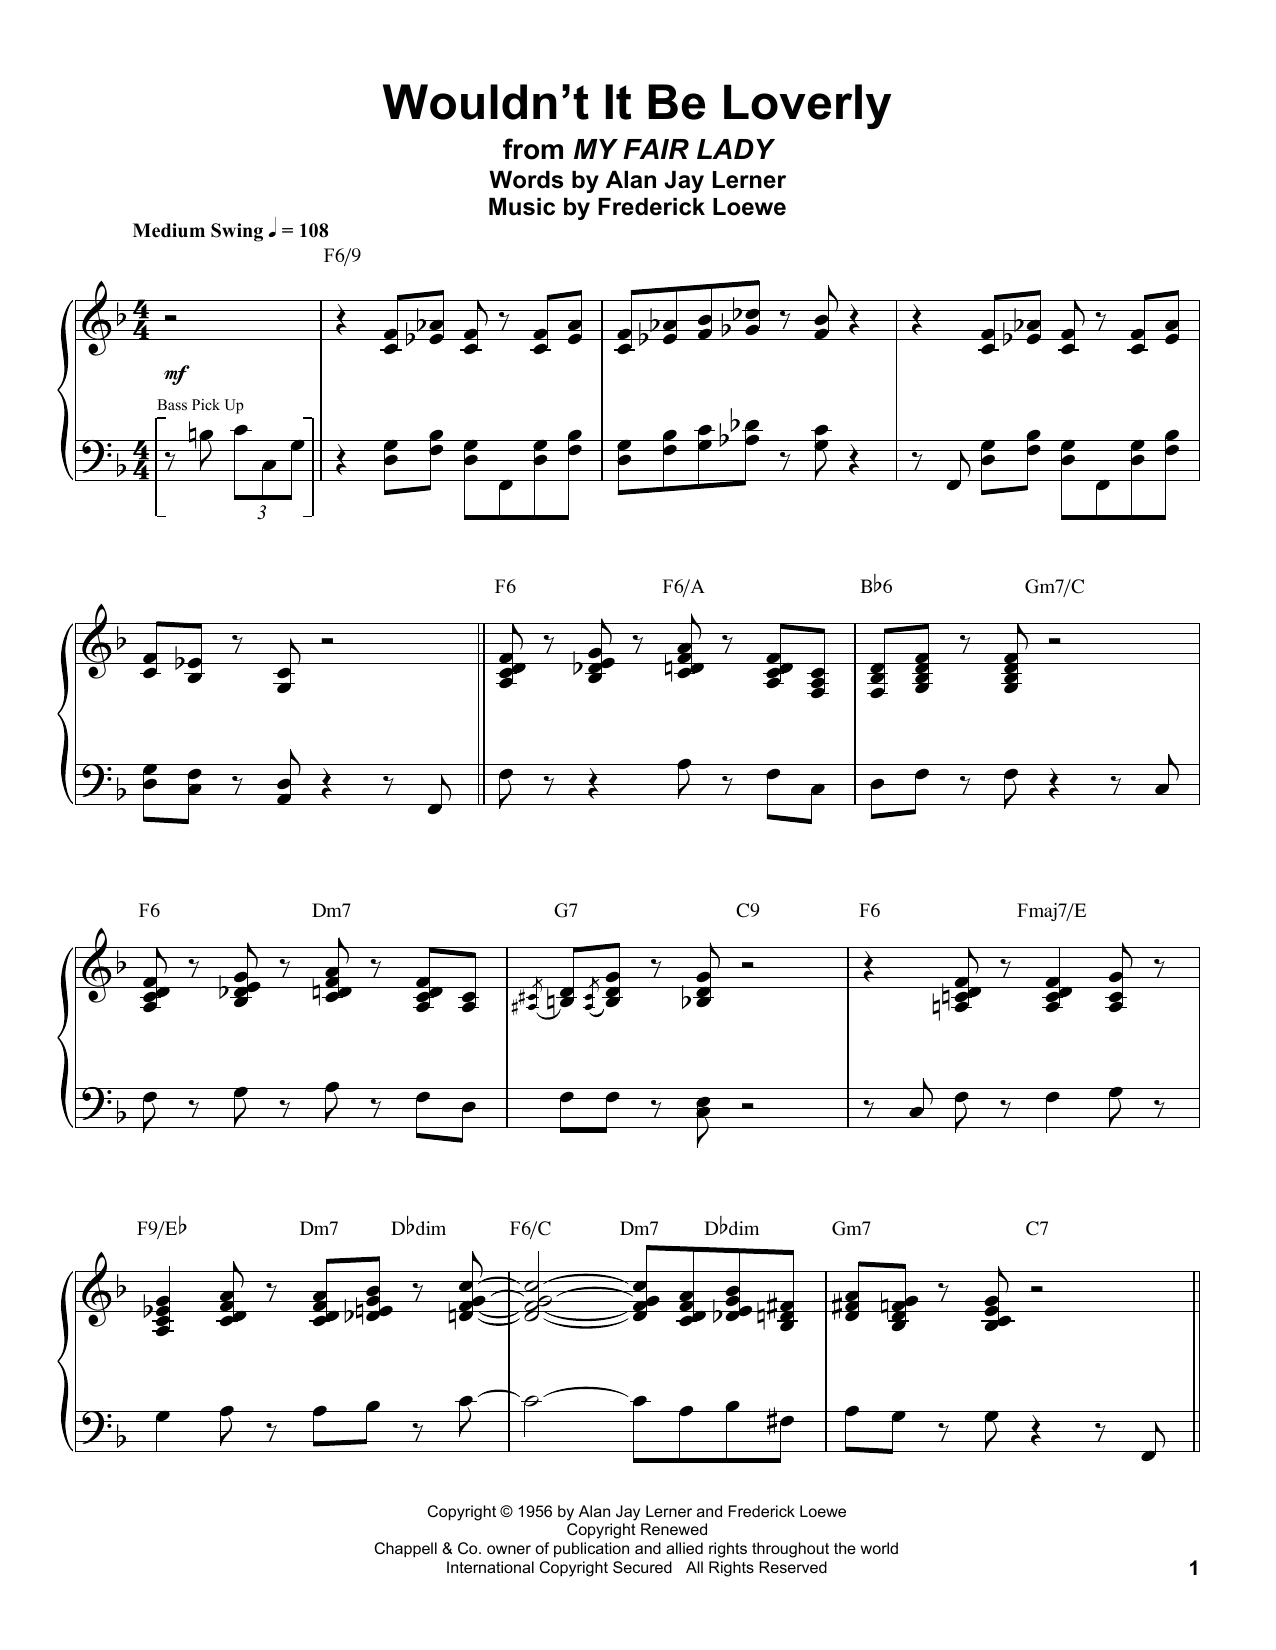 Download Oscar Peterson Wouldn't It Be Loverly Sheet Music